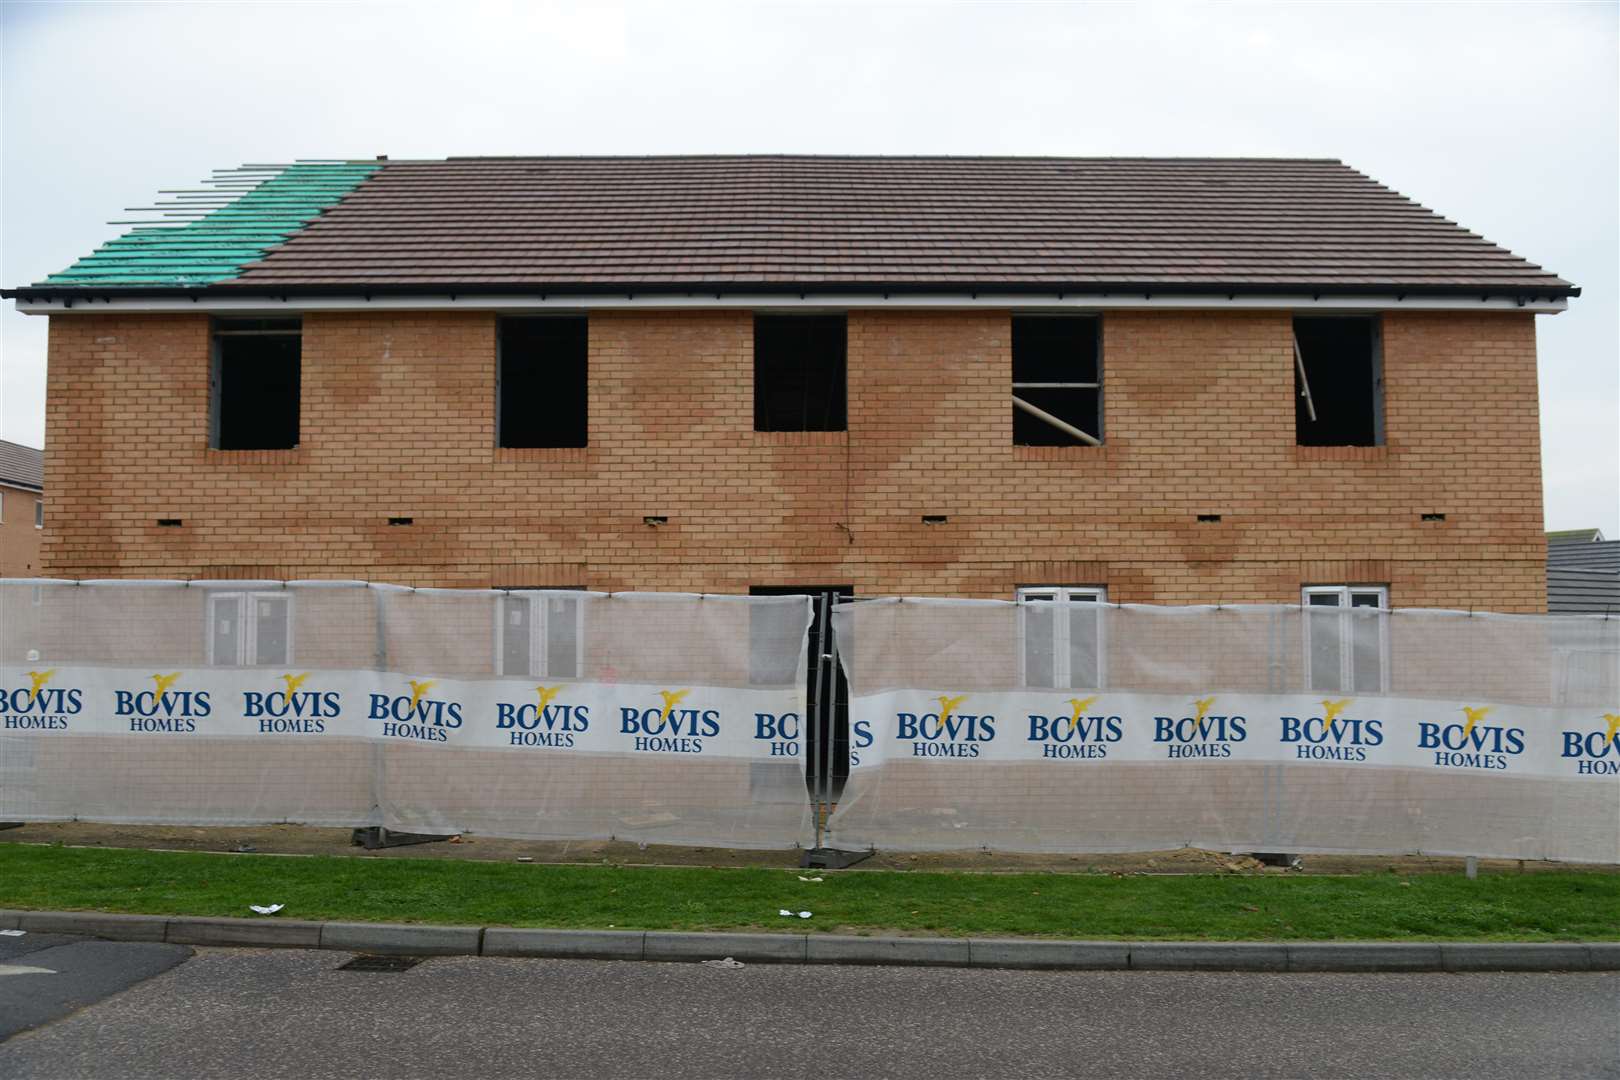 Bovis Homes is considering merger proposals